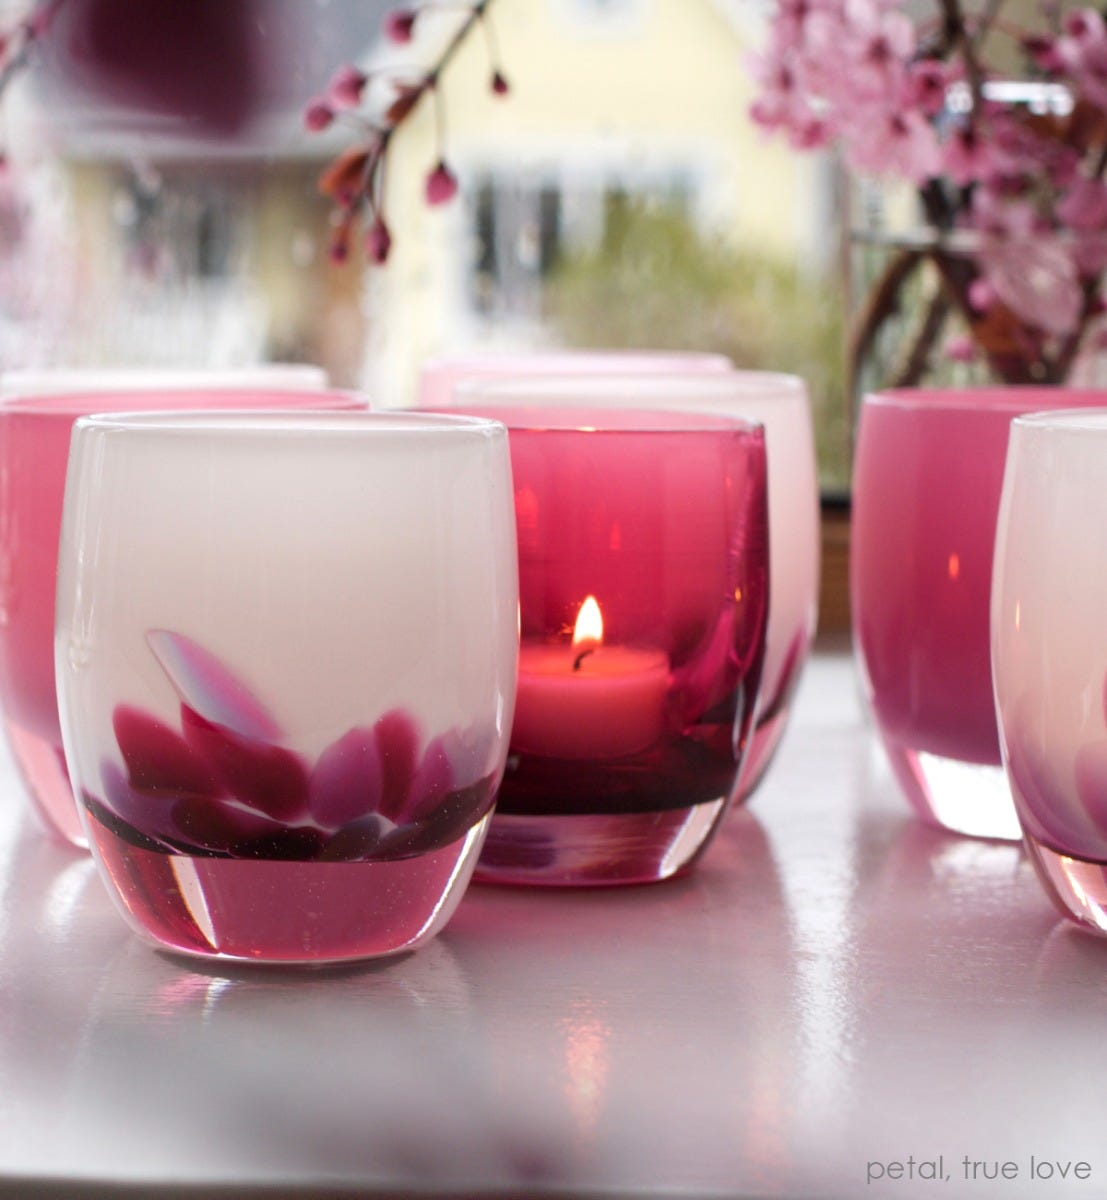 petal, white with pink petals emerging from the bottom, hand-blown glass votive candle holder, paired with true love